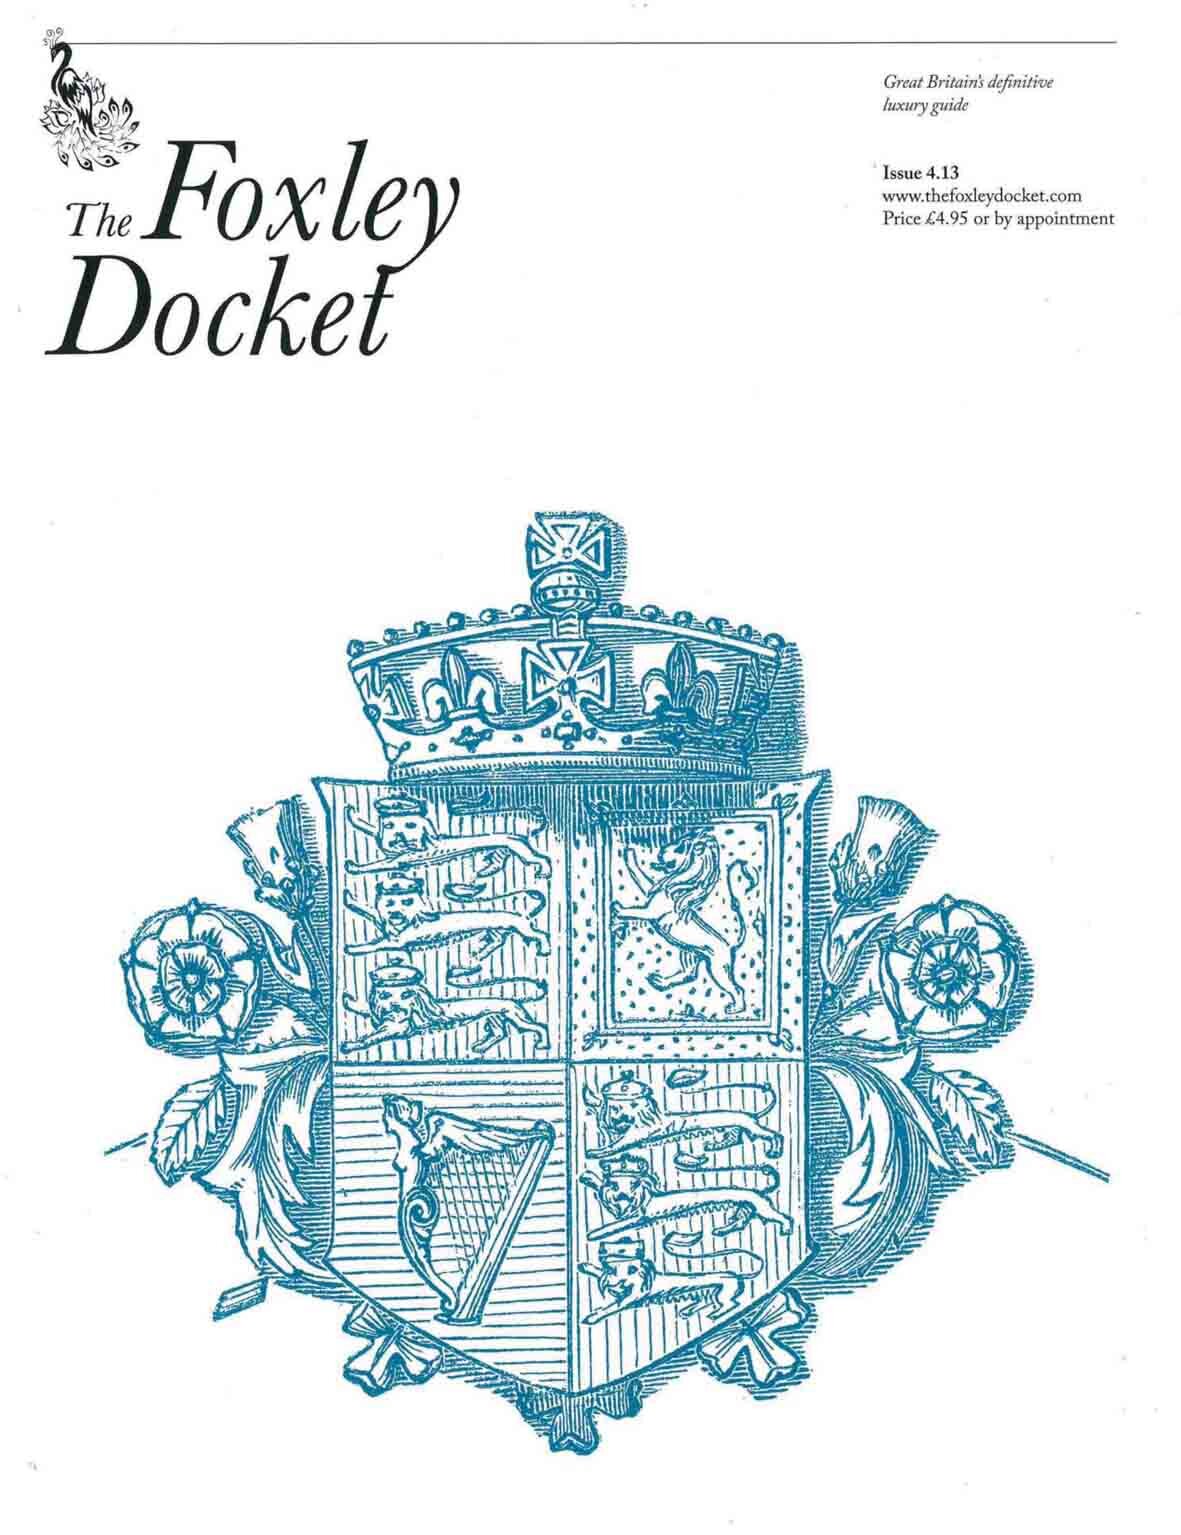 THE FOXLEY DOCKET ISSUE 4, 2013